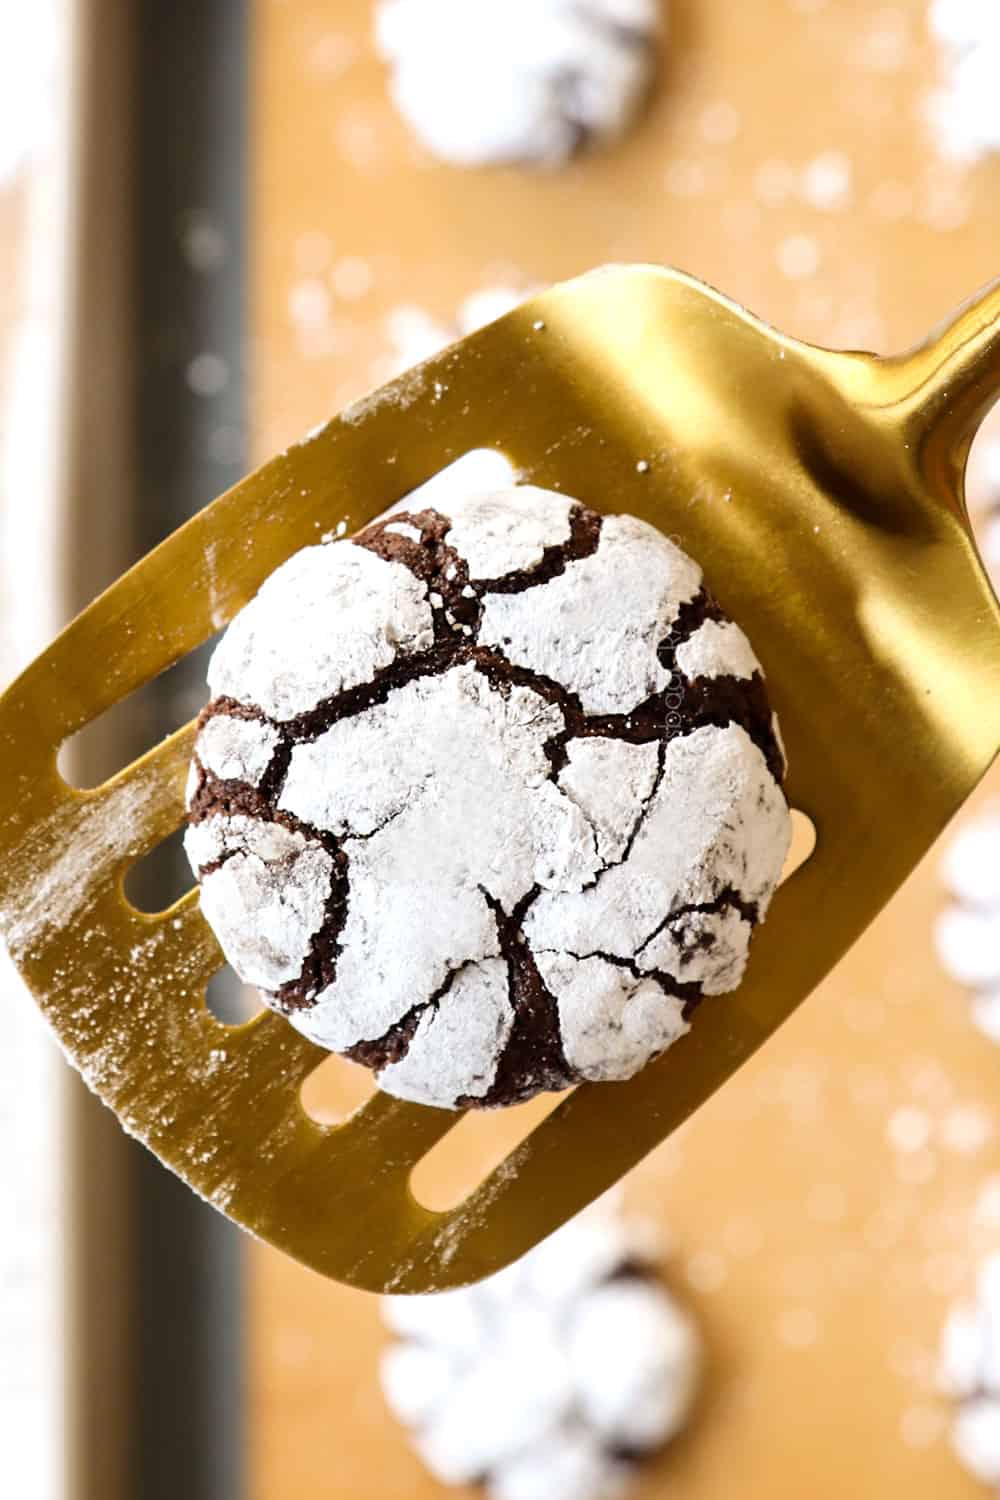 up close of a chocolate crinkle cookie on the spatula